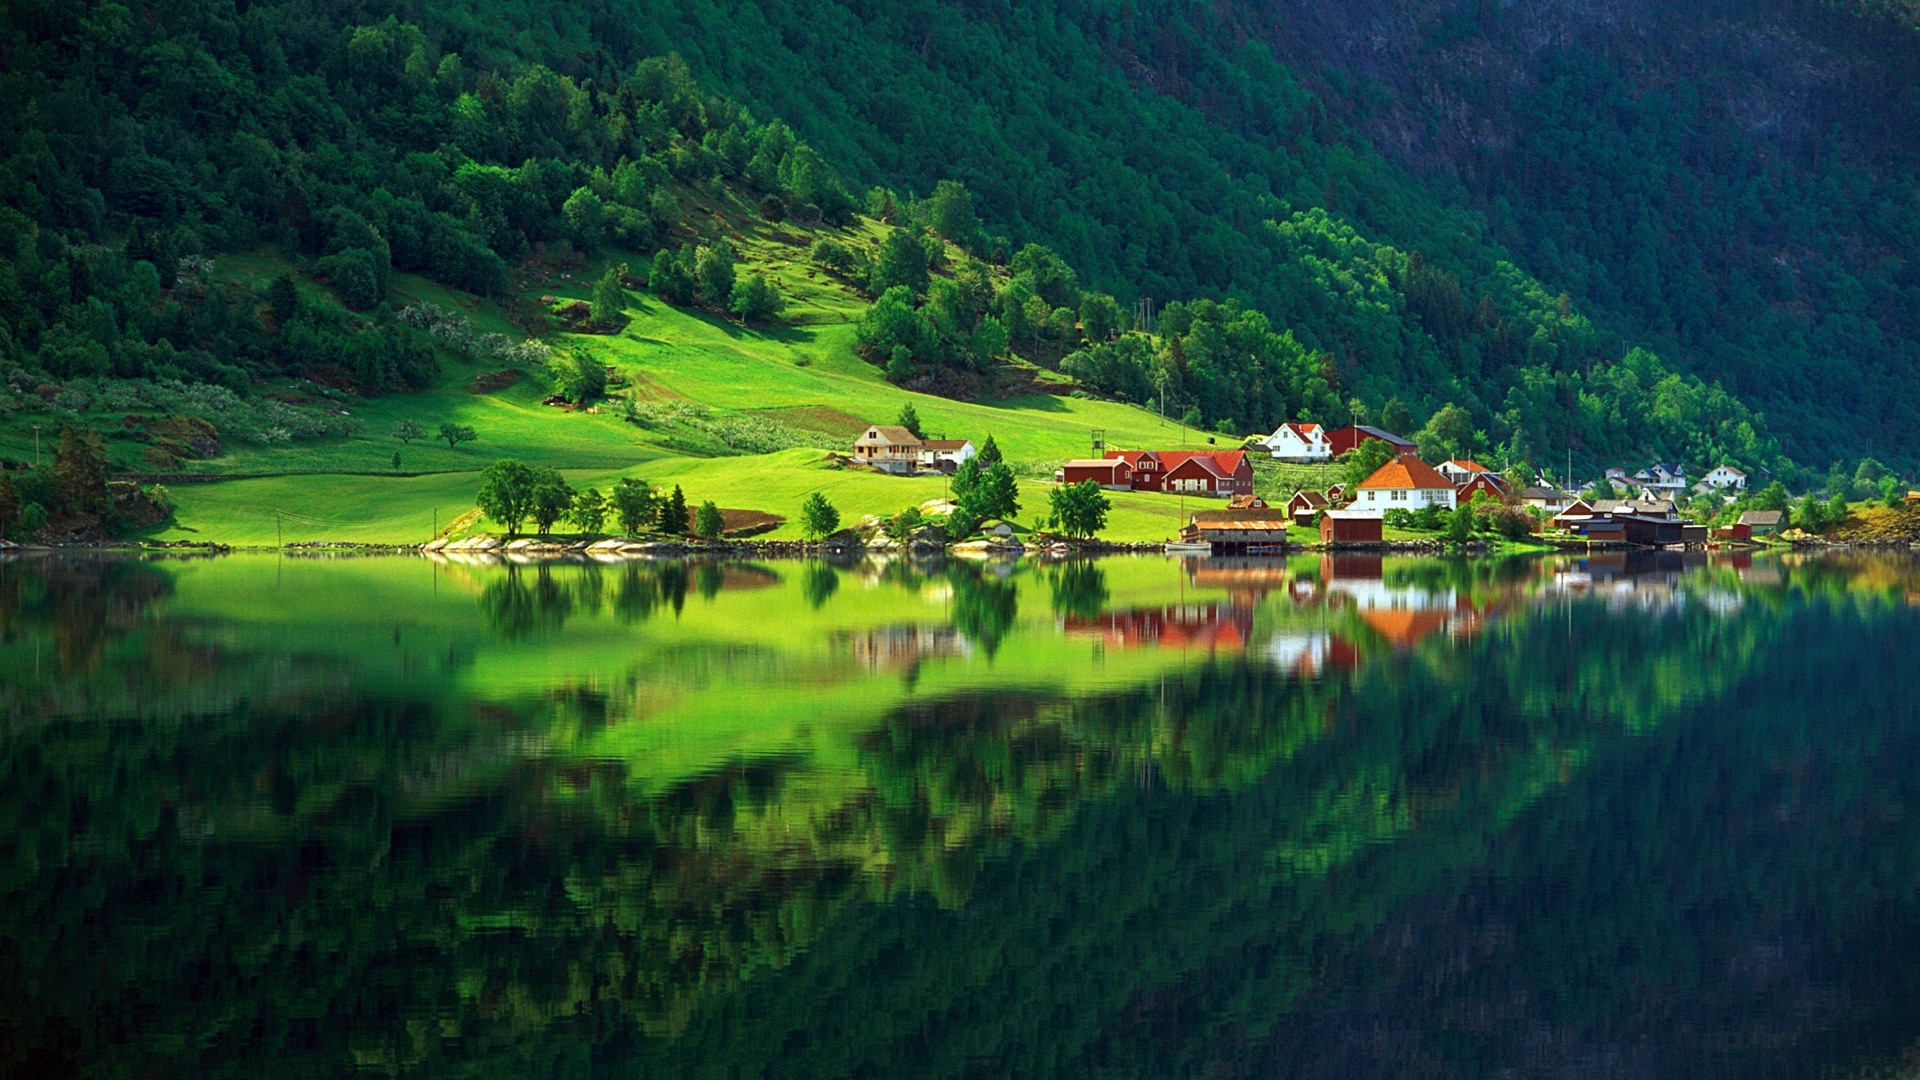 Windows 7 Wallpapers: Nordic Landscapes #10 - 1920x1080